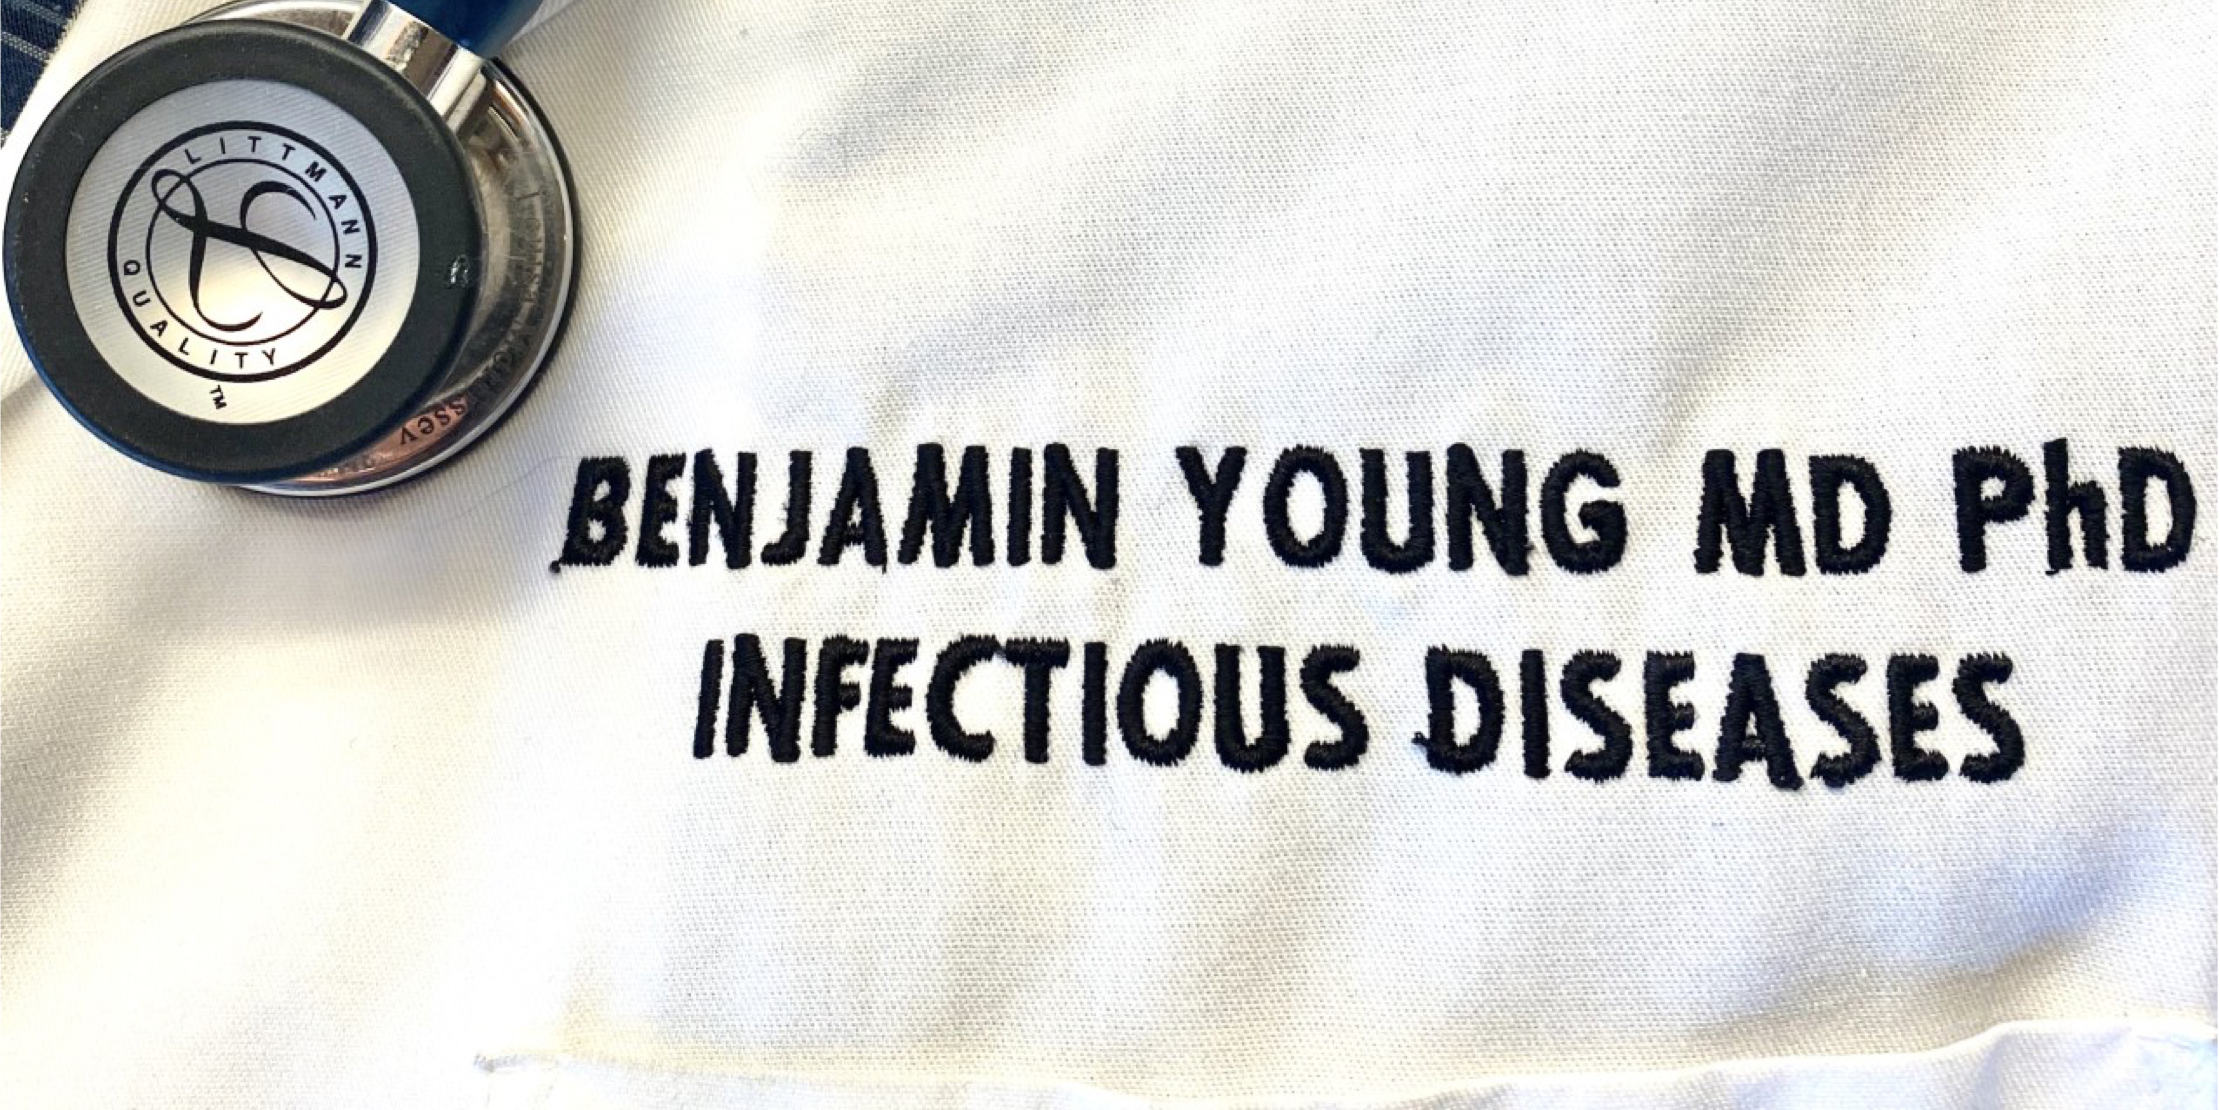 Ben Young name tag in his doctor’s gown